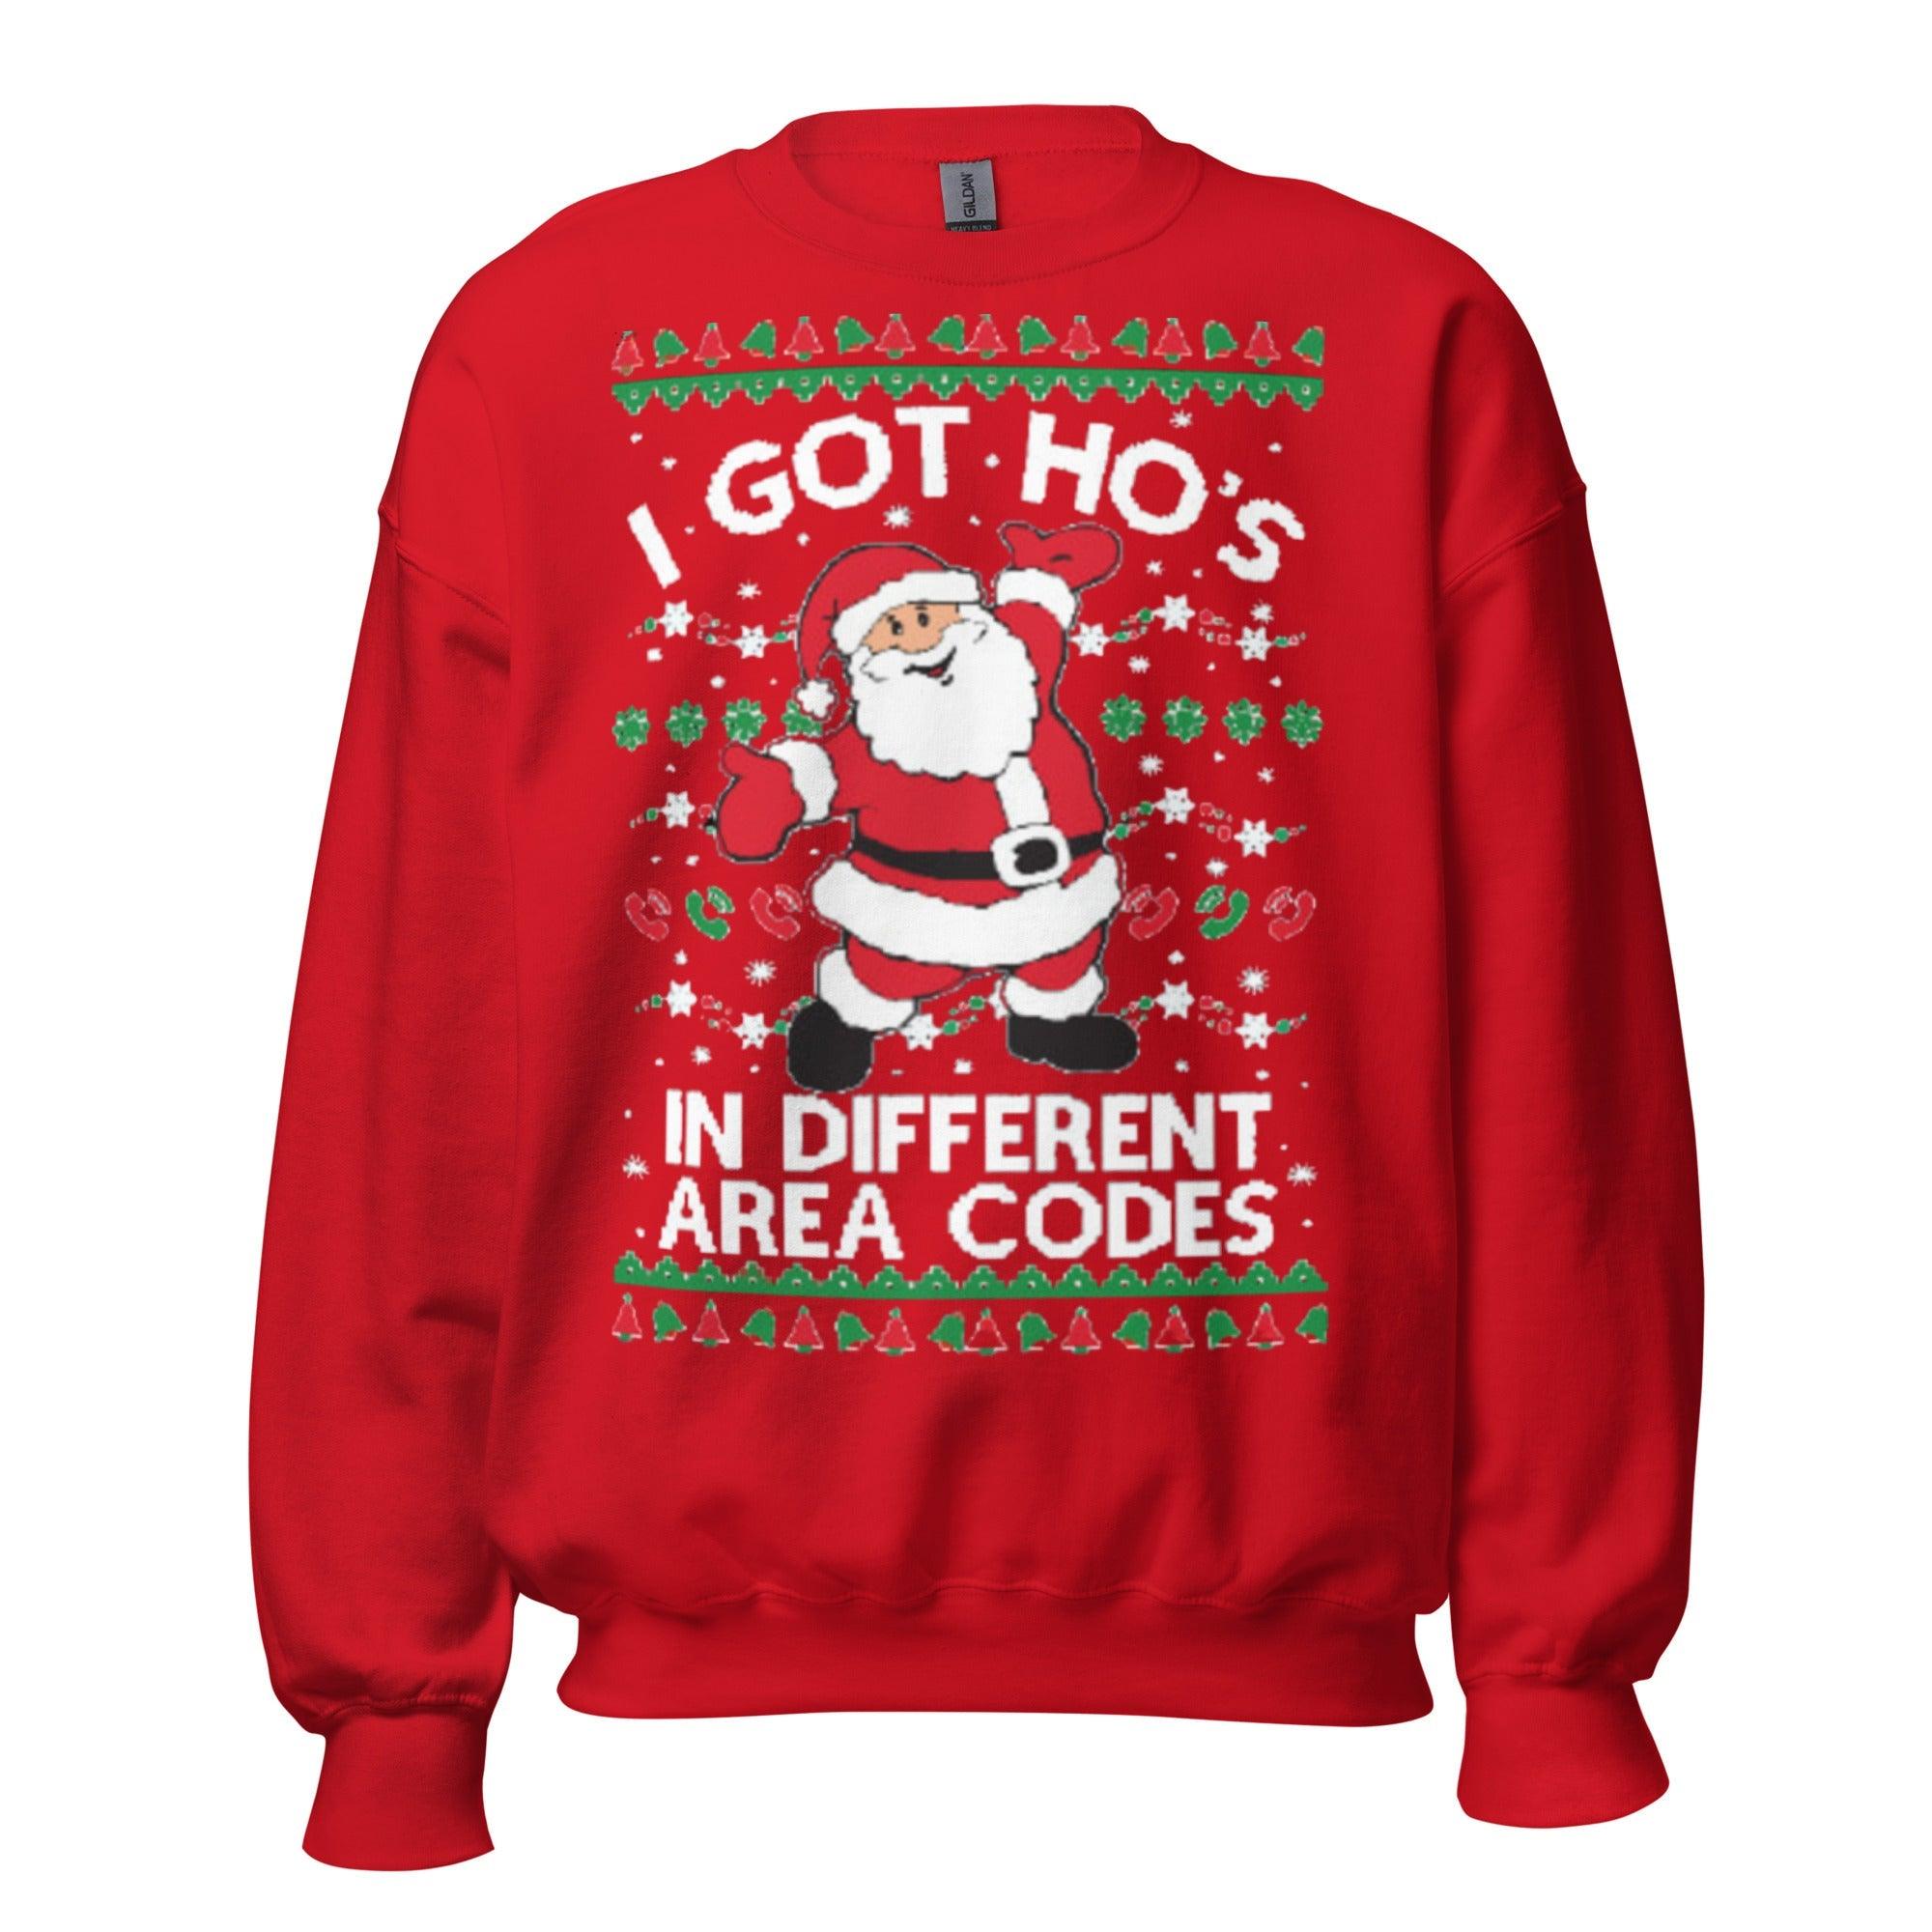 I Got Ho's in Different Area Codes Ugly Christmas Sweater - TopKoalaTee